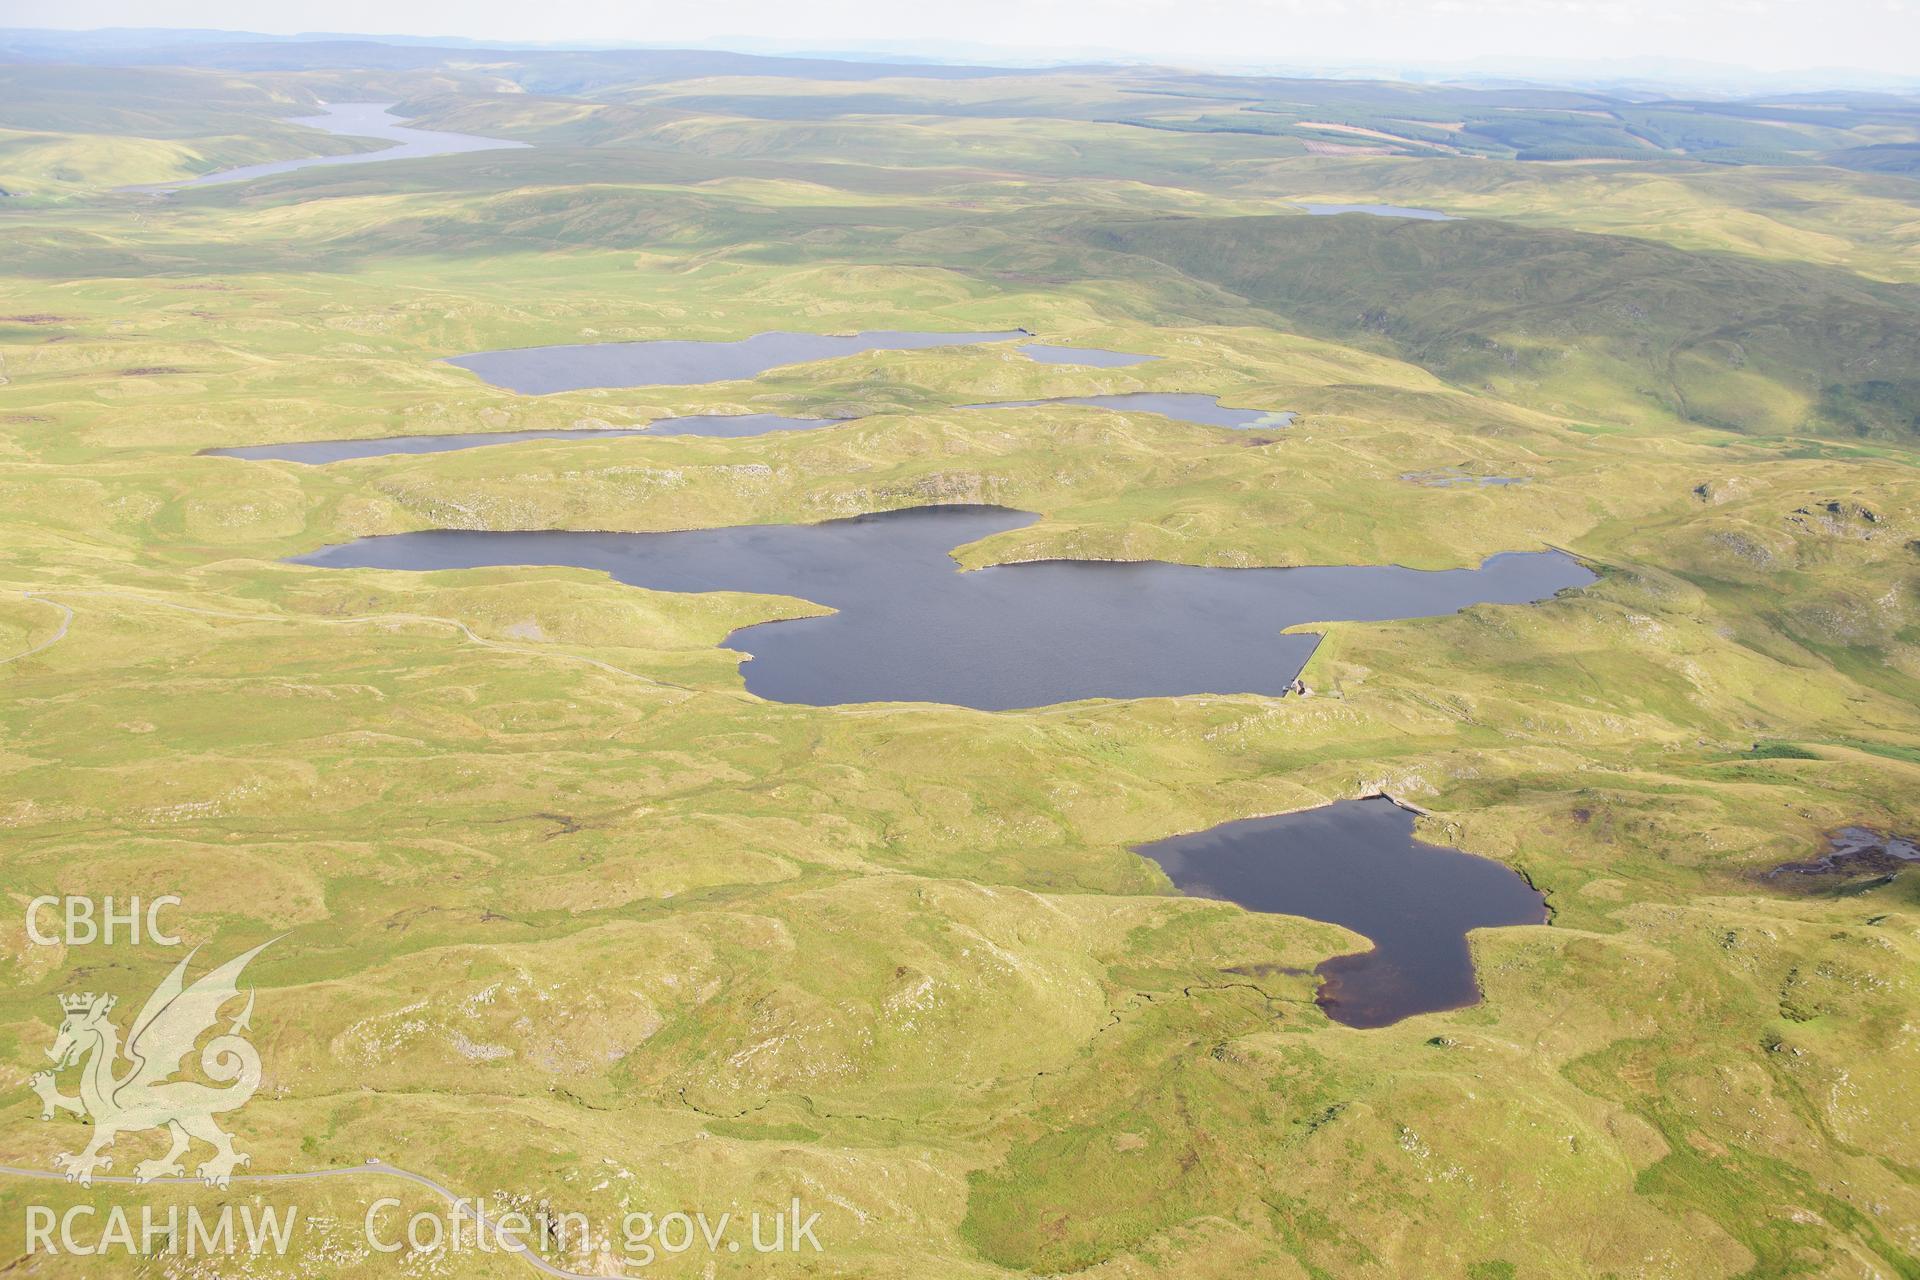 RCAHMW colour oblique photograph of Teifi Pools water scheme. Taken by Toby Driver on 10/08/2012.